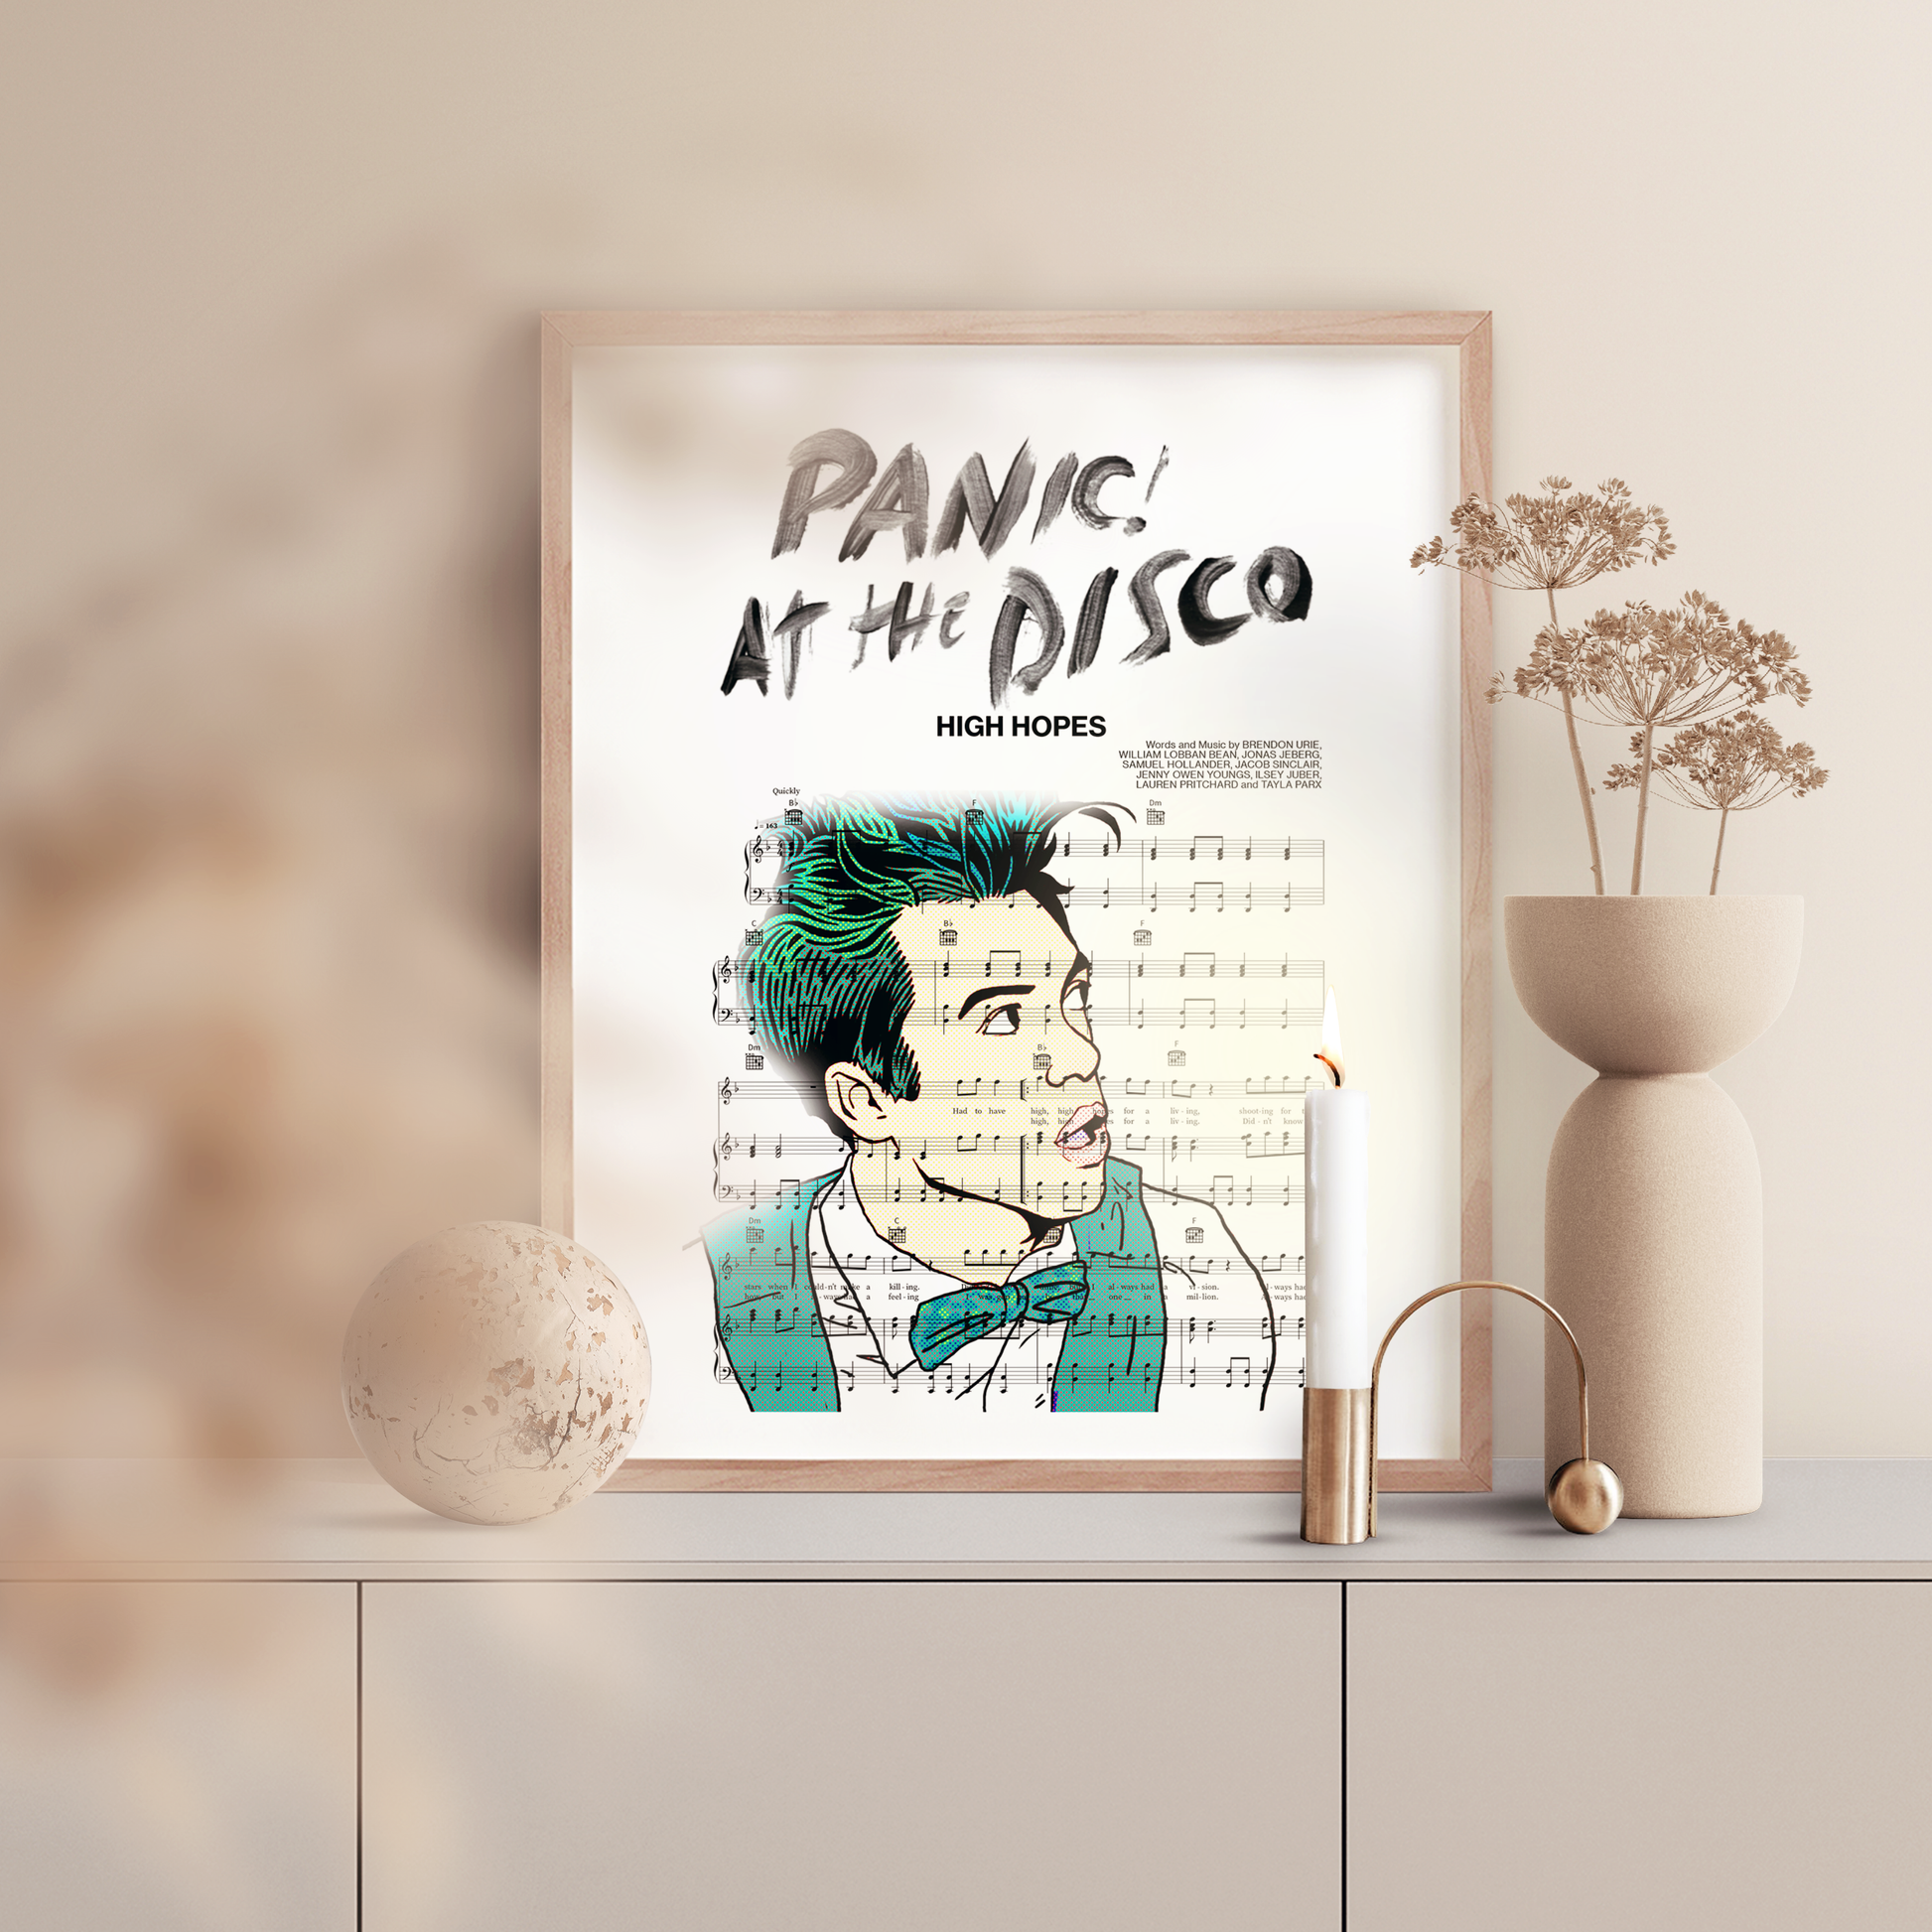 Celebrate your first dance anniversary with this striking High Hopes Poster. Showcasing luxurious lyrics inspired art prints, this poster combines modern wall art with custom song music to create a unique and timeless piece. Perfectly showcase your favourite album covers, this print is of the highest quality and a great way to add a personal touch to your home.